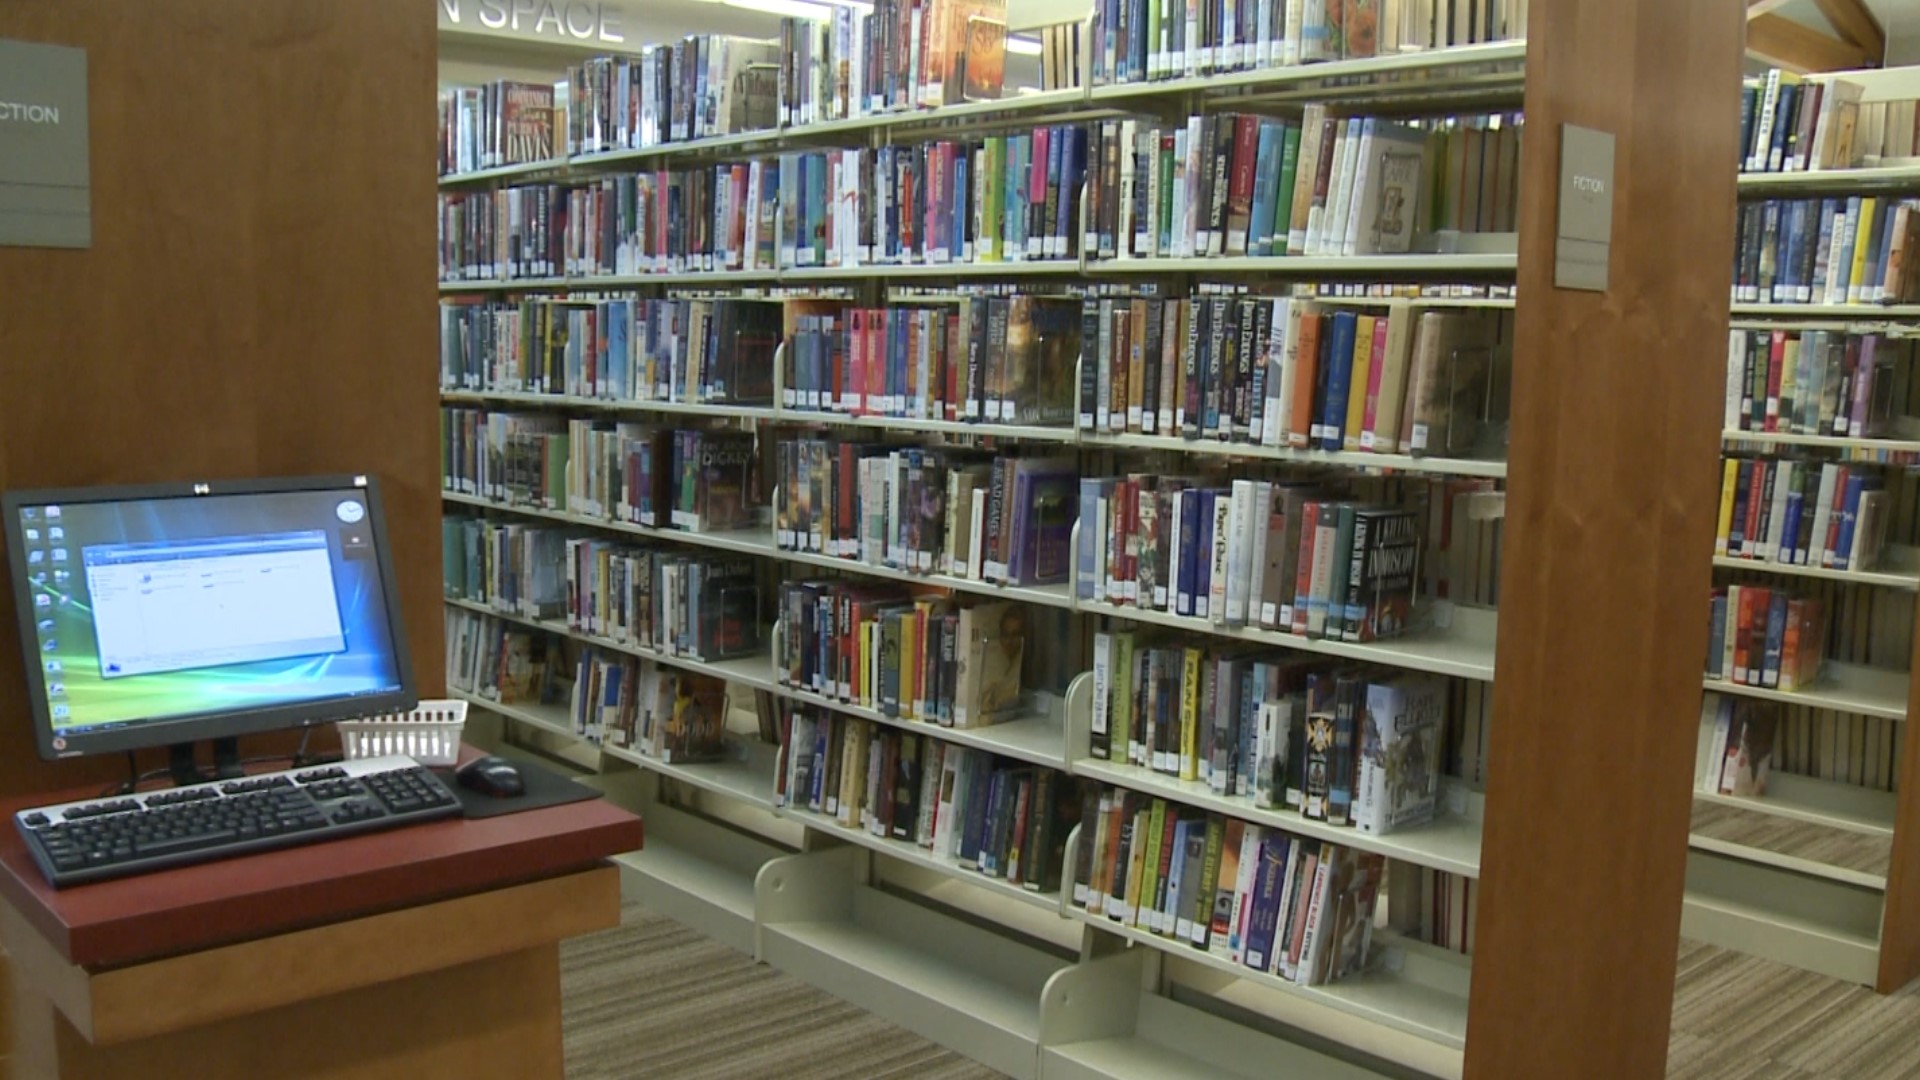 Some Crawford Co. parents are suing the library system for "unlawful censorship of materials in the county libraries", stating it goes against the First Amendment.